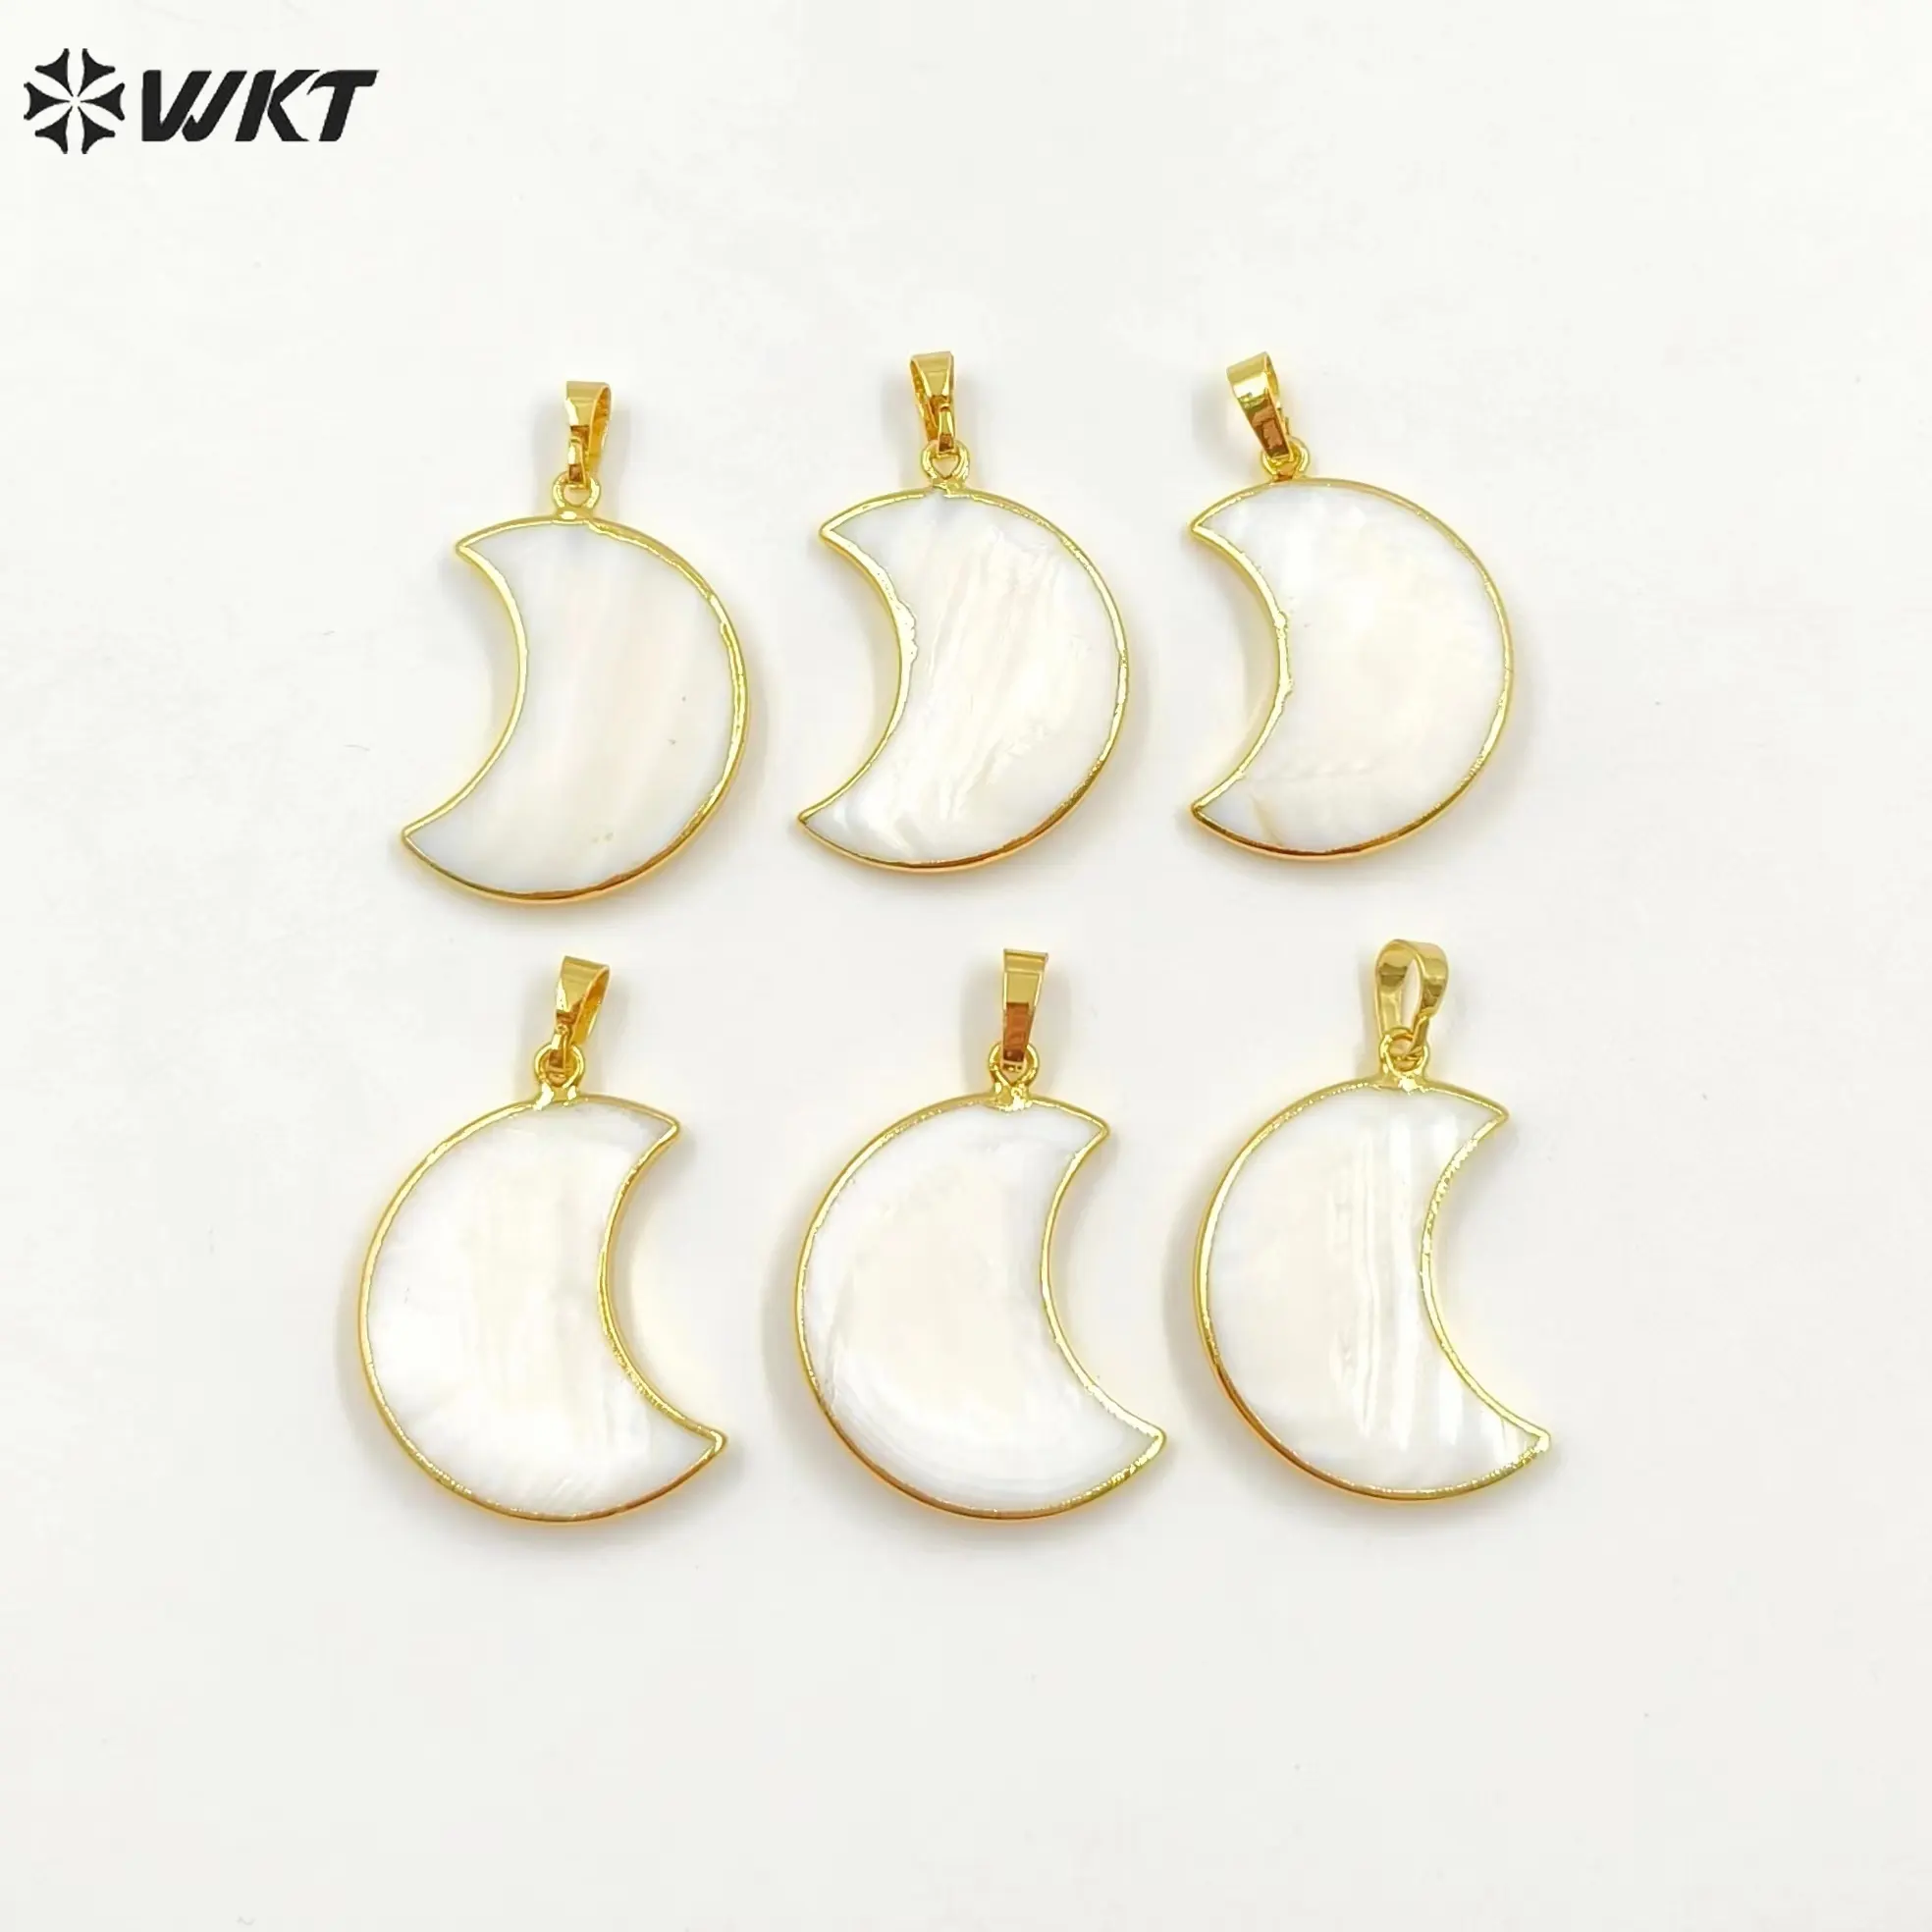 WT-P1137 New Arrival Wholesale High Quality Pure pearl moon pendant with 18K gold Chic Generous for gift